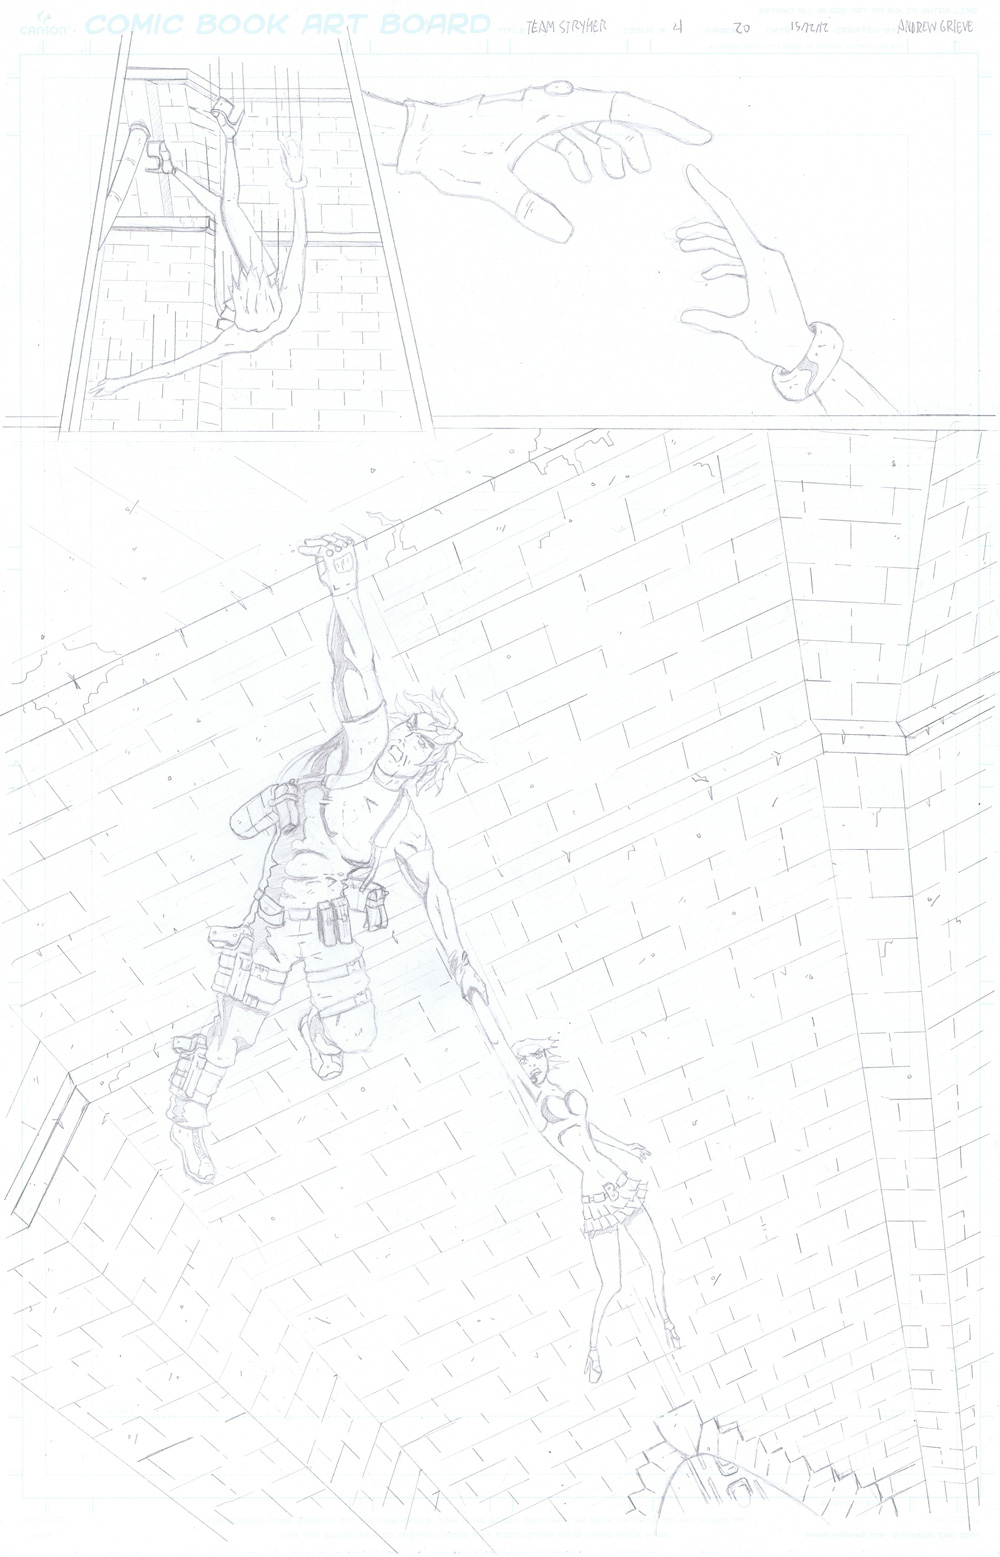 MISSION 004: PAGE 20 PENCIL